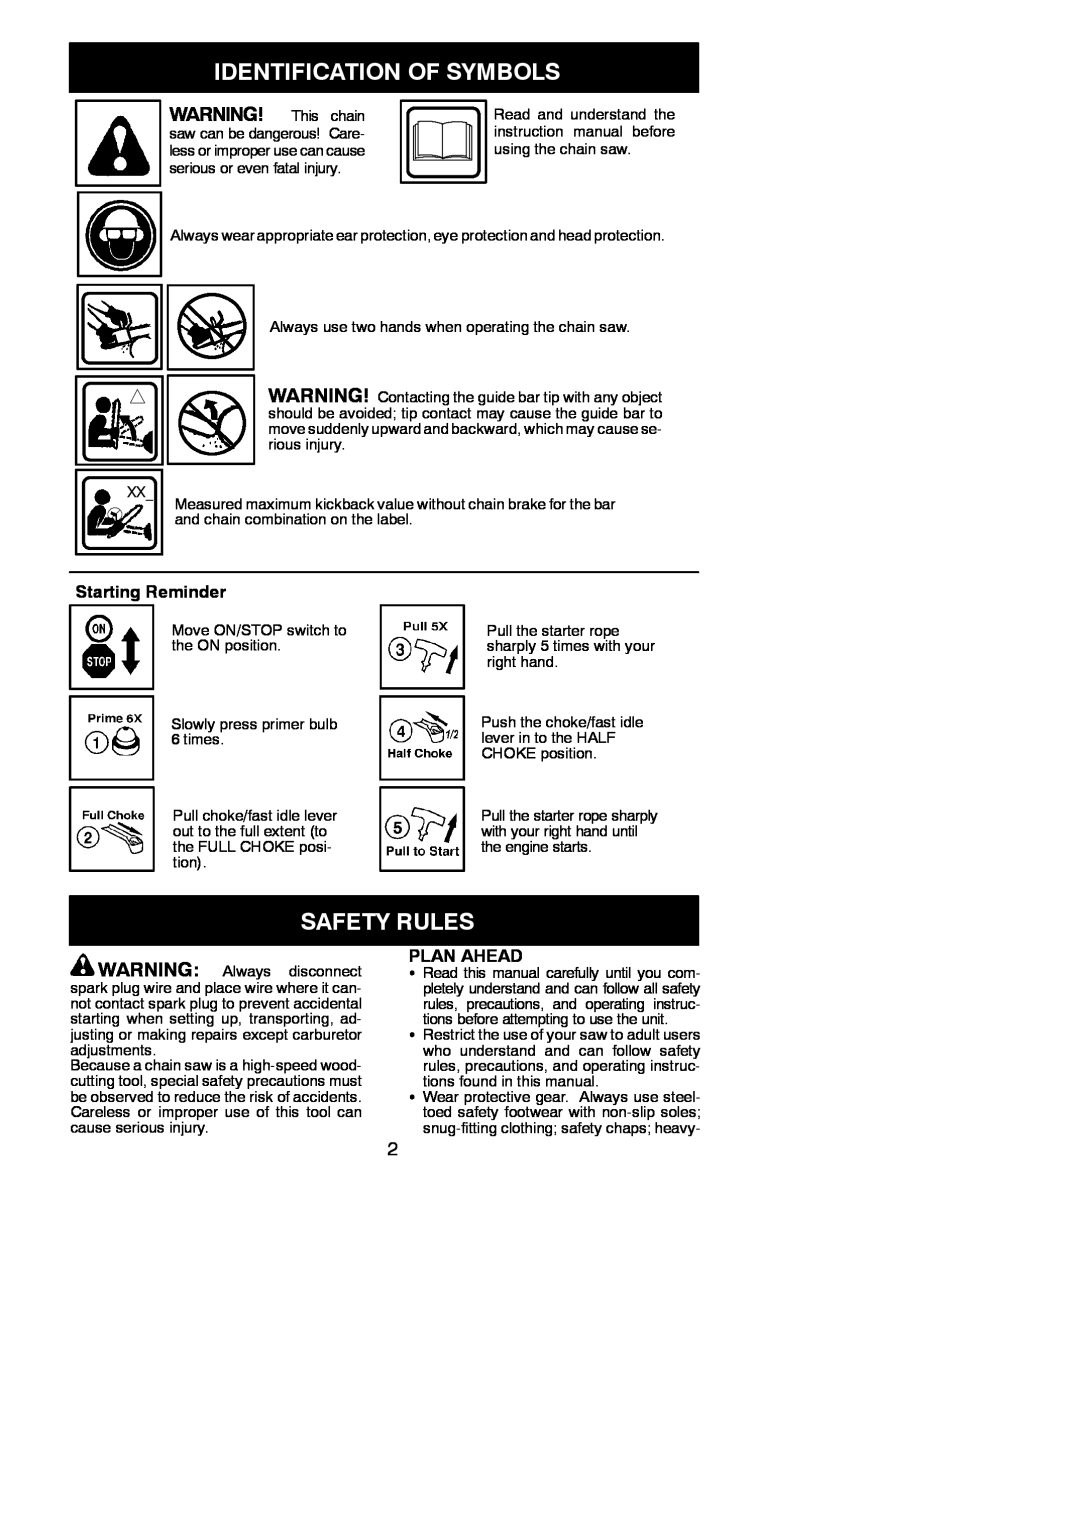 Poulan 966063001 instruction manual Identification Of Symbols, Safety Rules, Starting Reminder, Plan Ahead 